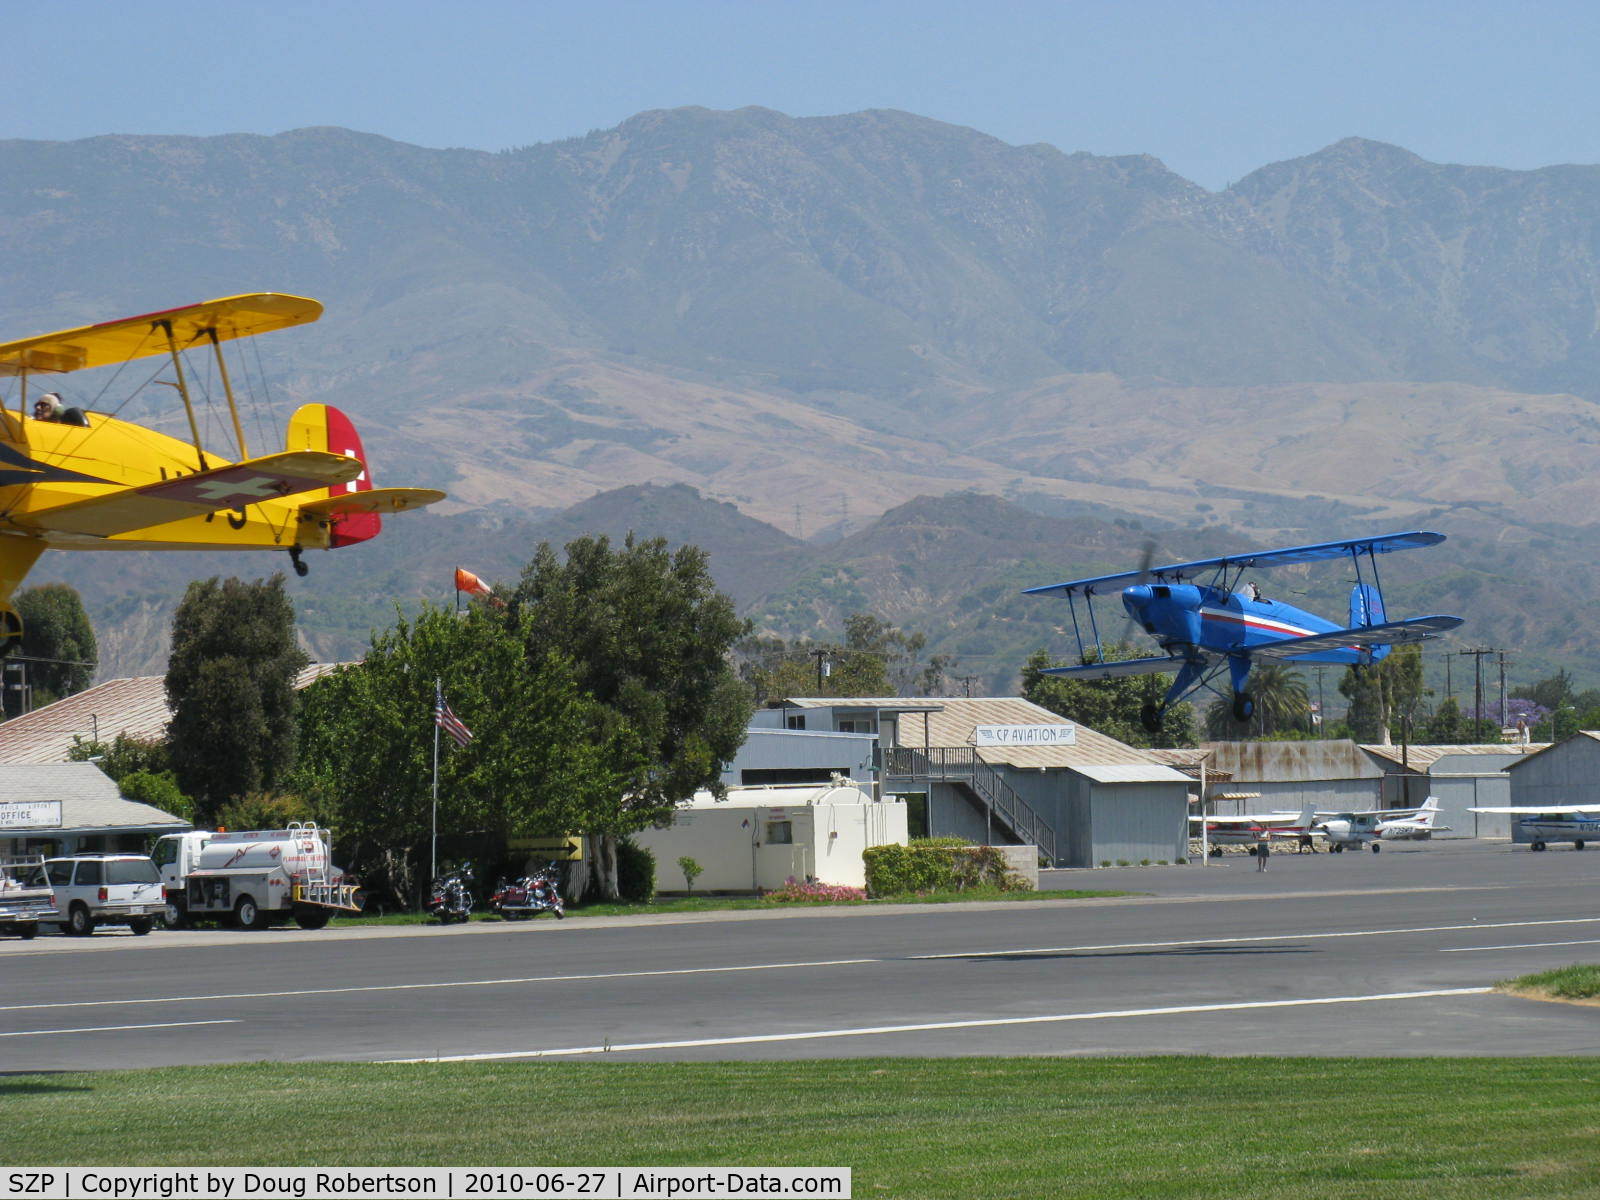 Santa Paula Airport (SZP) - N131MR and N104A in tandem takeoff Rwy 22 at the National Bucker fly-In. (I need a wider angle lens)